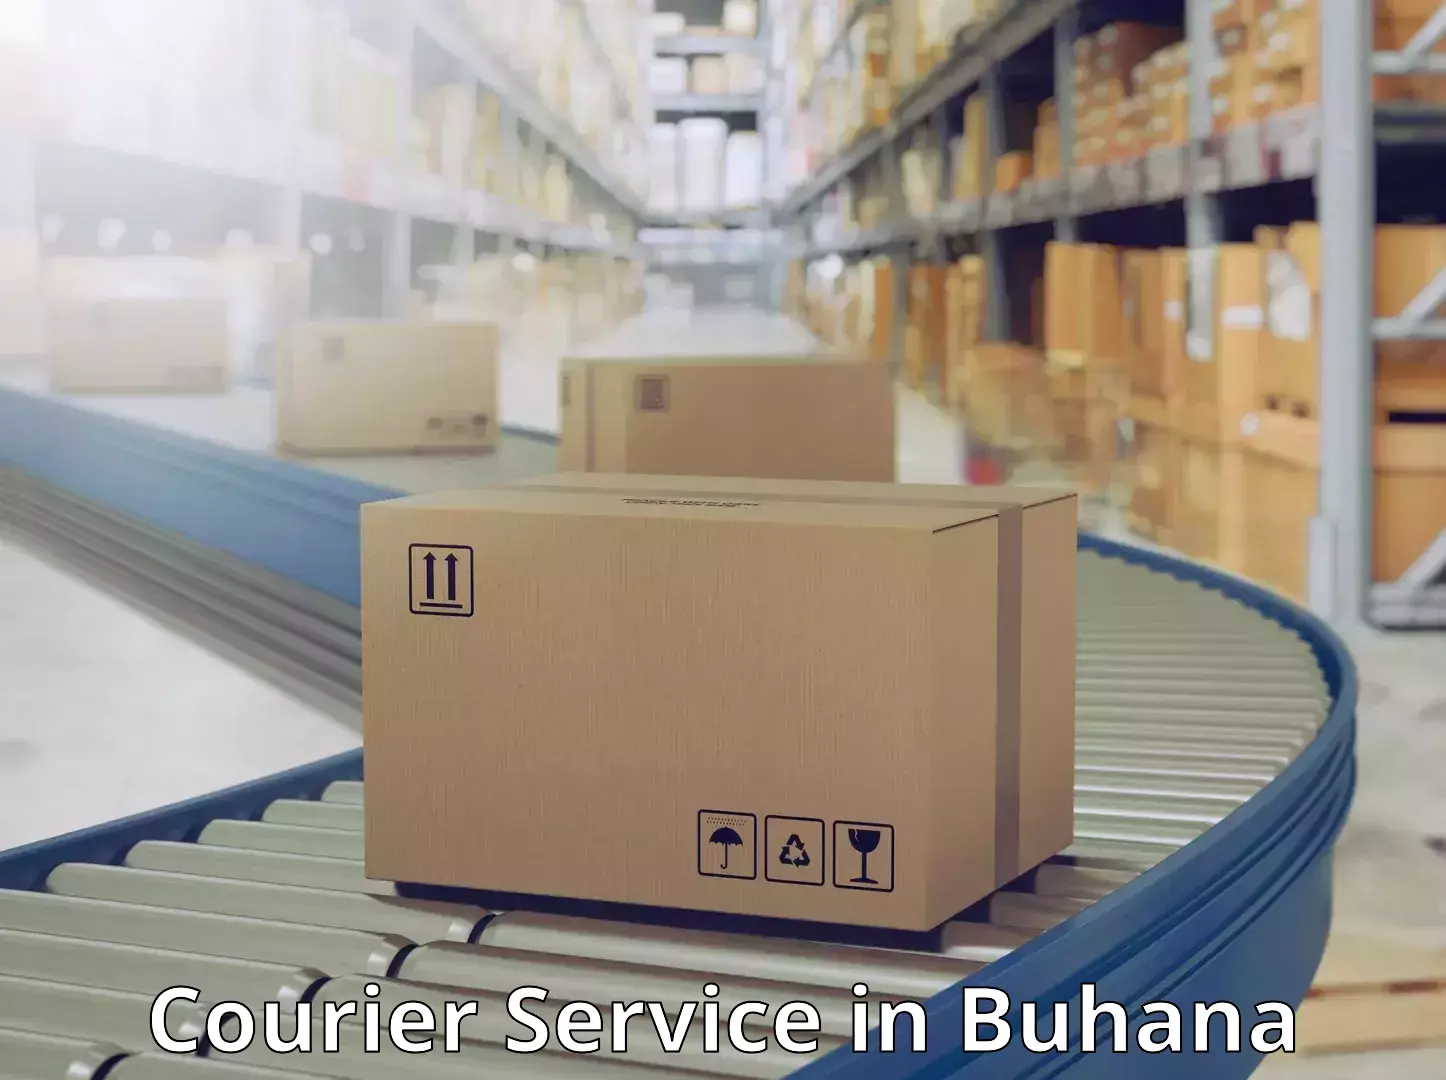 Tailored freight services in Buhana